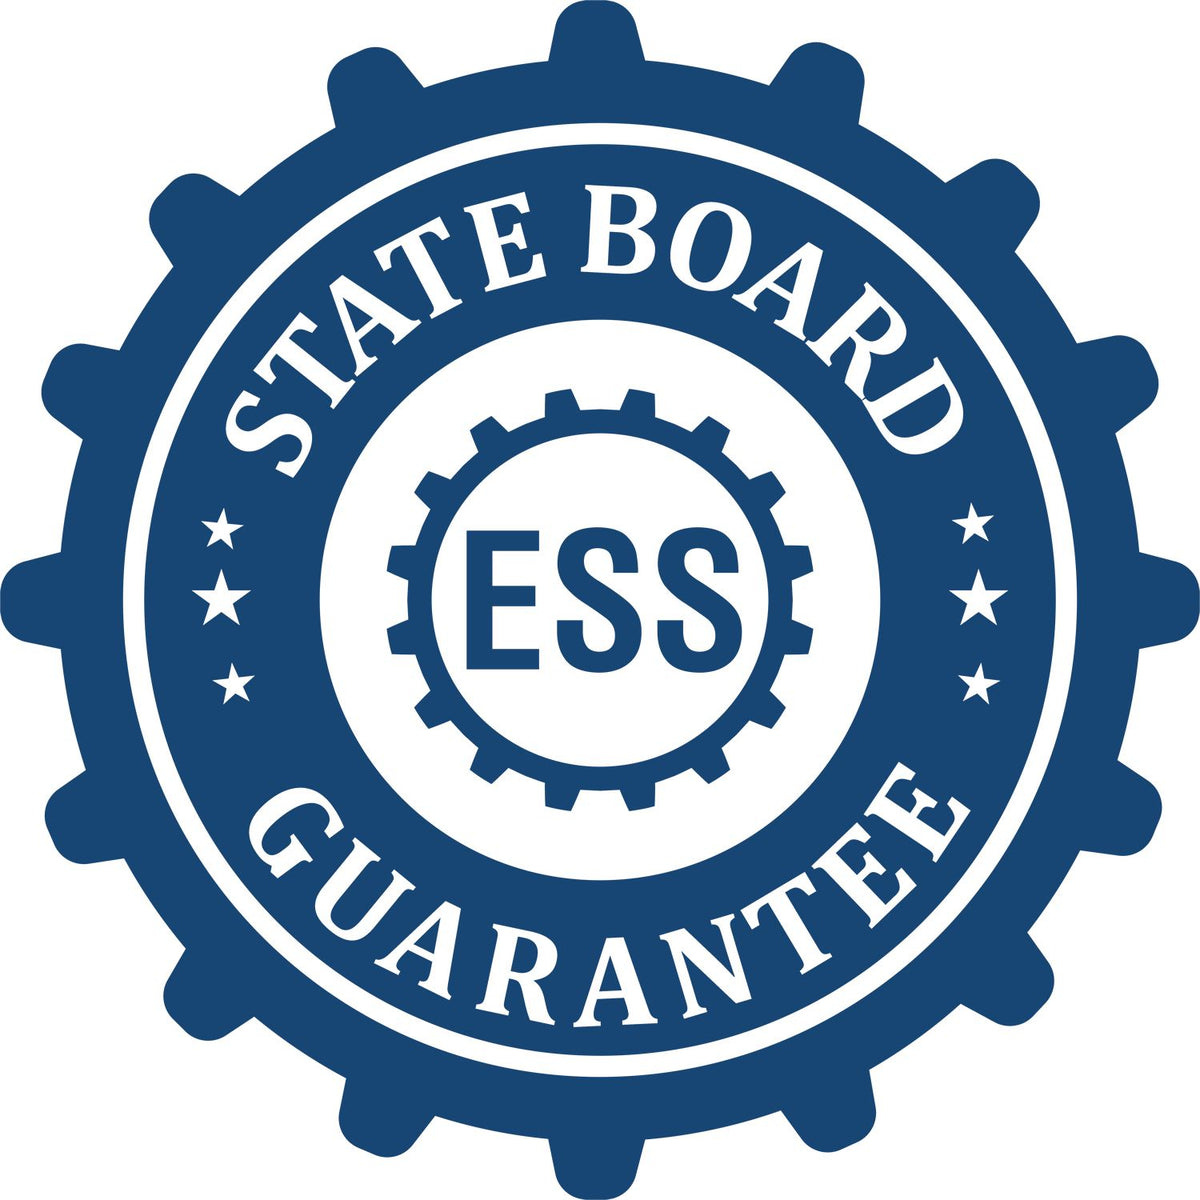 An emblem in a gear shape illustrating a state board guarantee for the State of Louisiana Extended Long Reach Geologist Seal